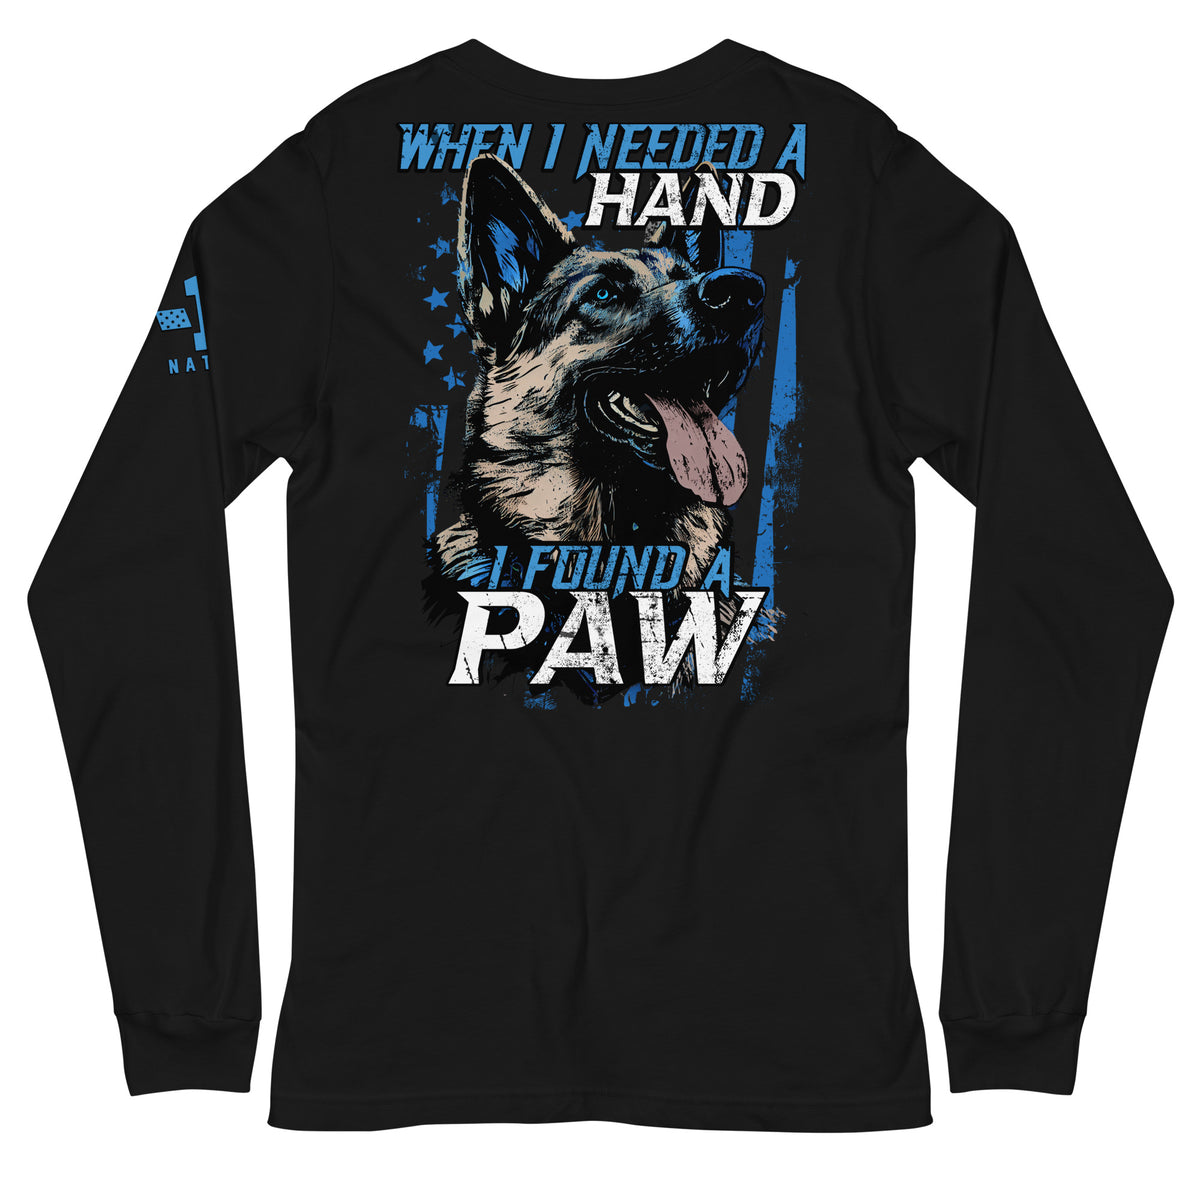 Needed a Hand. Found a Paw. Long Sleeve